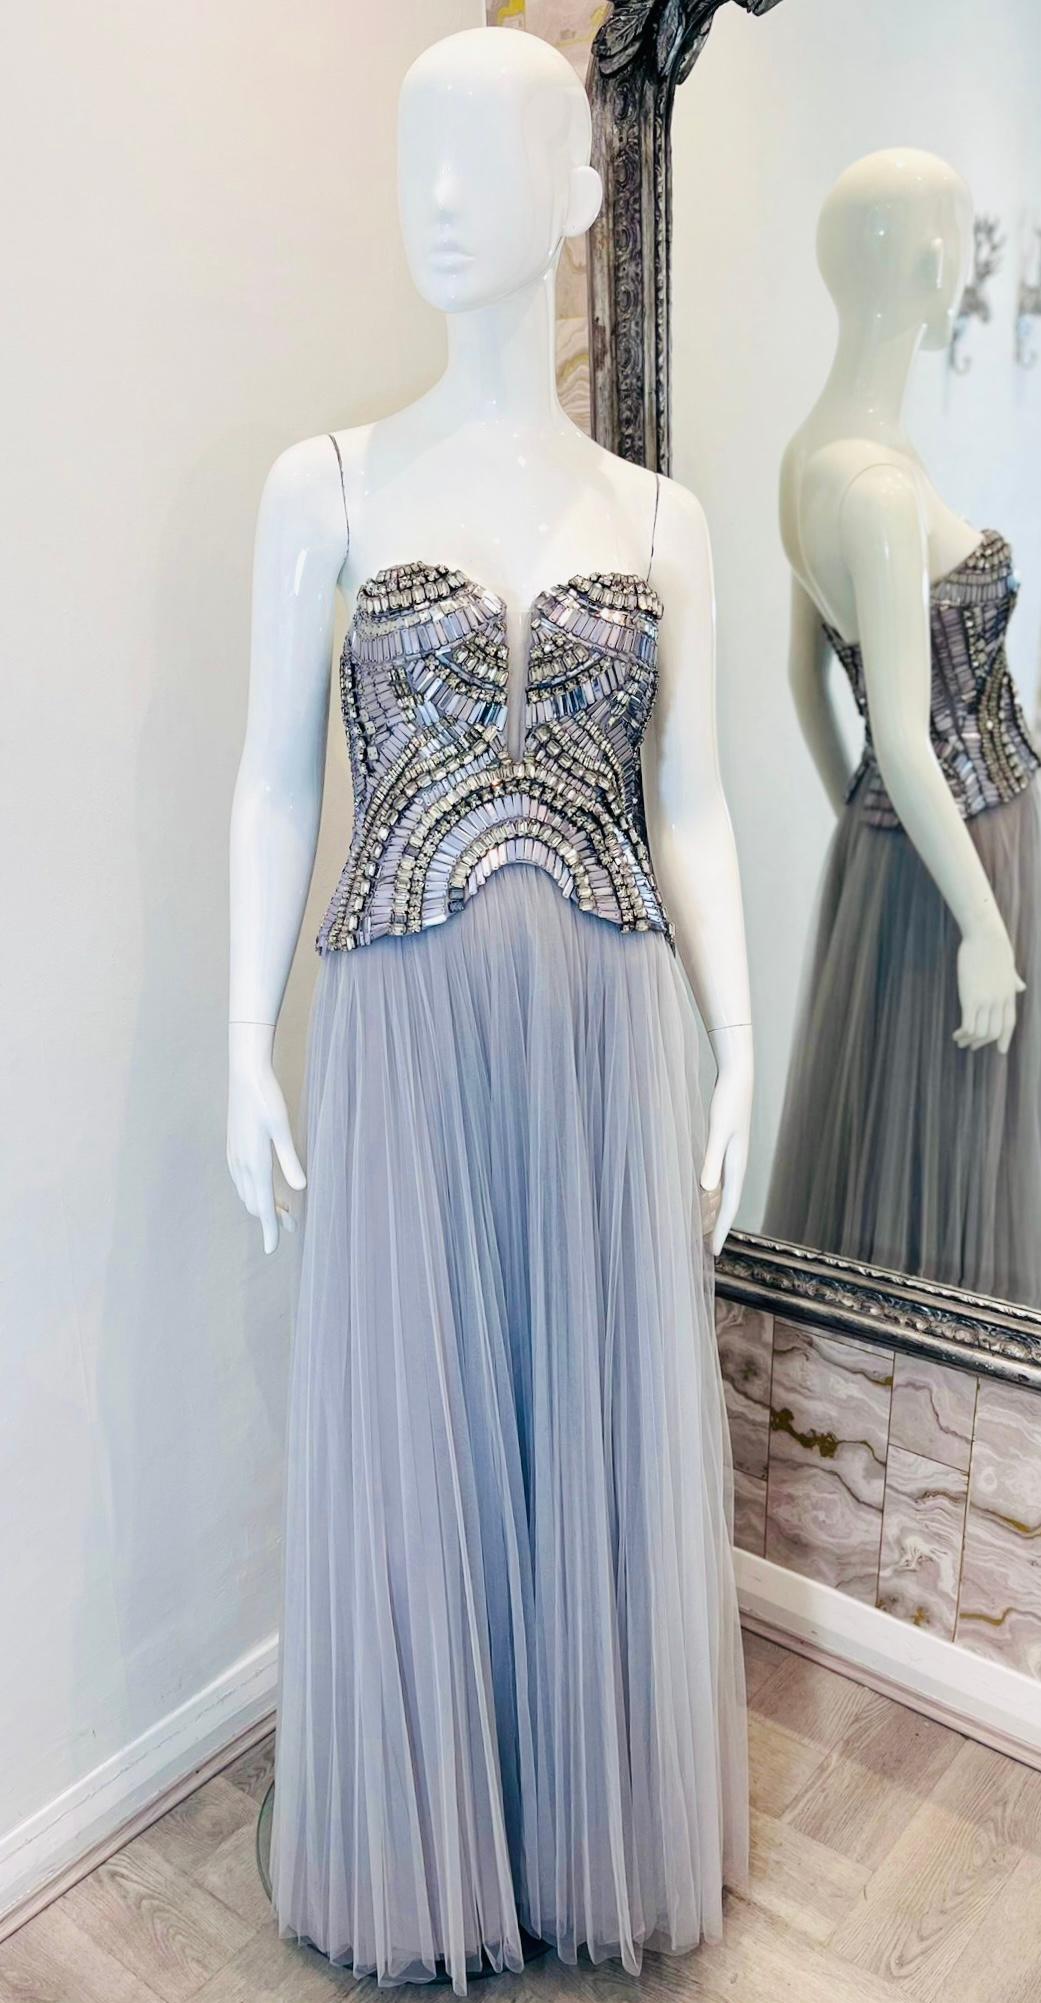 Alberta Ferretti Limited Edition Crystal & Bead Tulle Gown

Light slate grey strapless gown designed with crystal and bead embroidered corset.

Detailed with sweetheart neckline and deep V-Cut with a sheer insert.

Featuring long, tulle plisse skirt